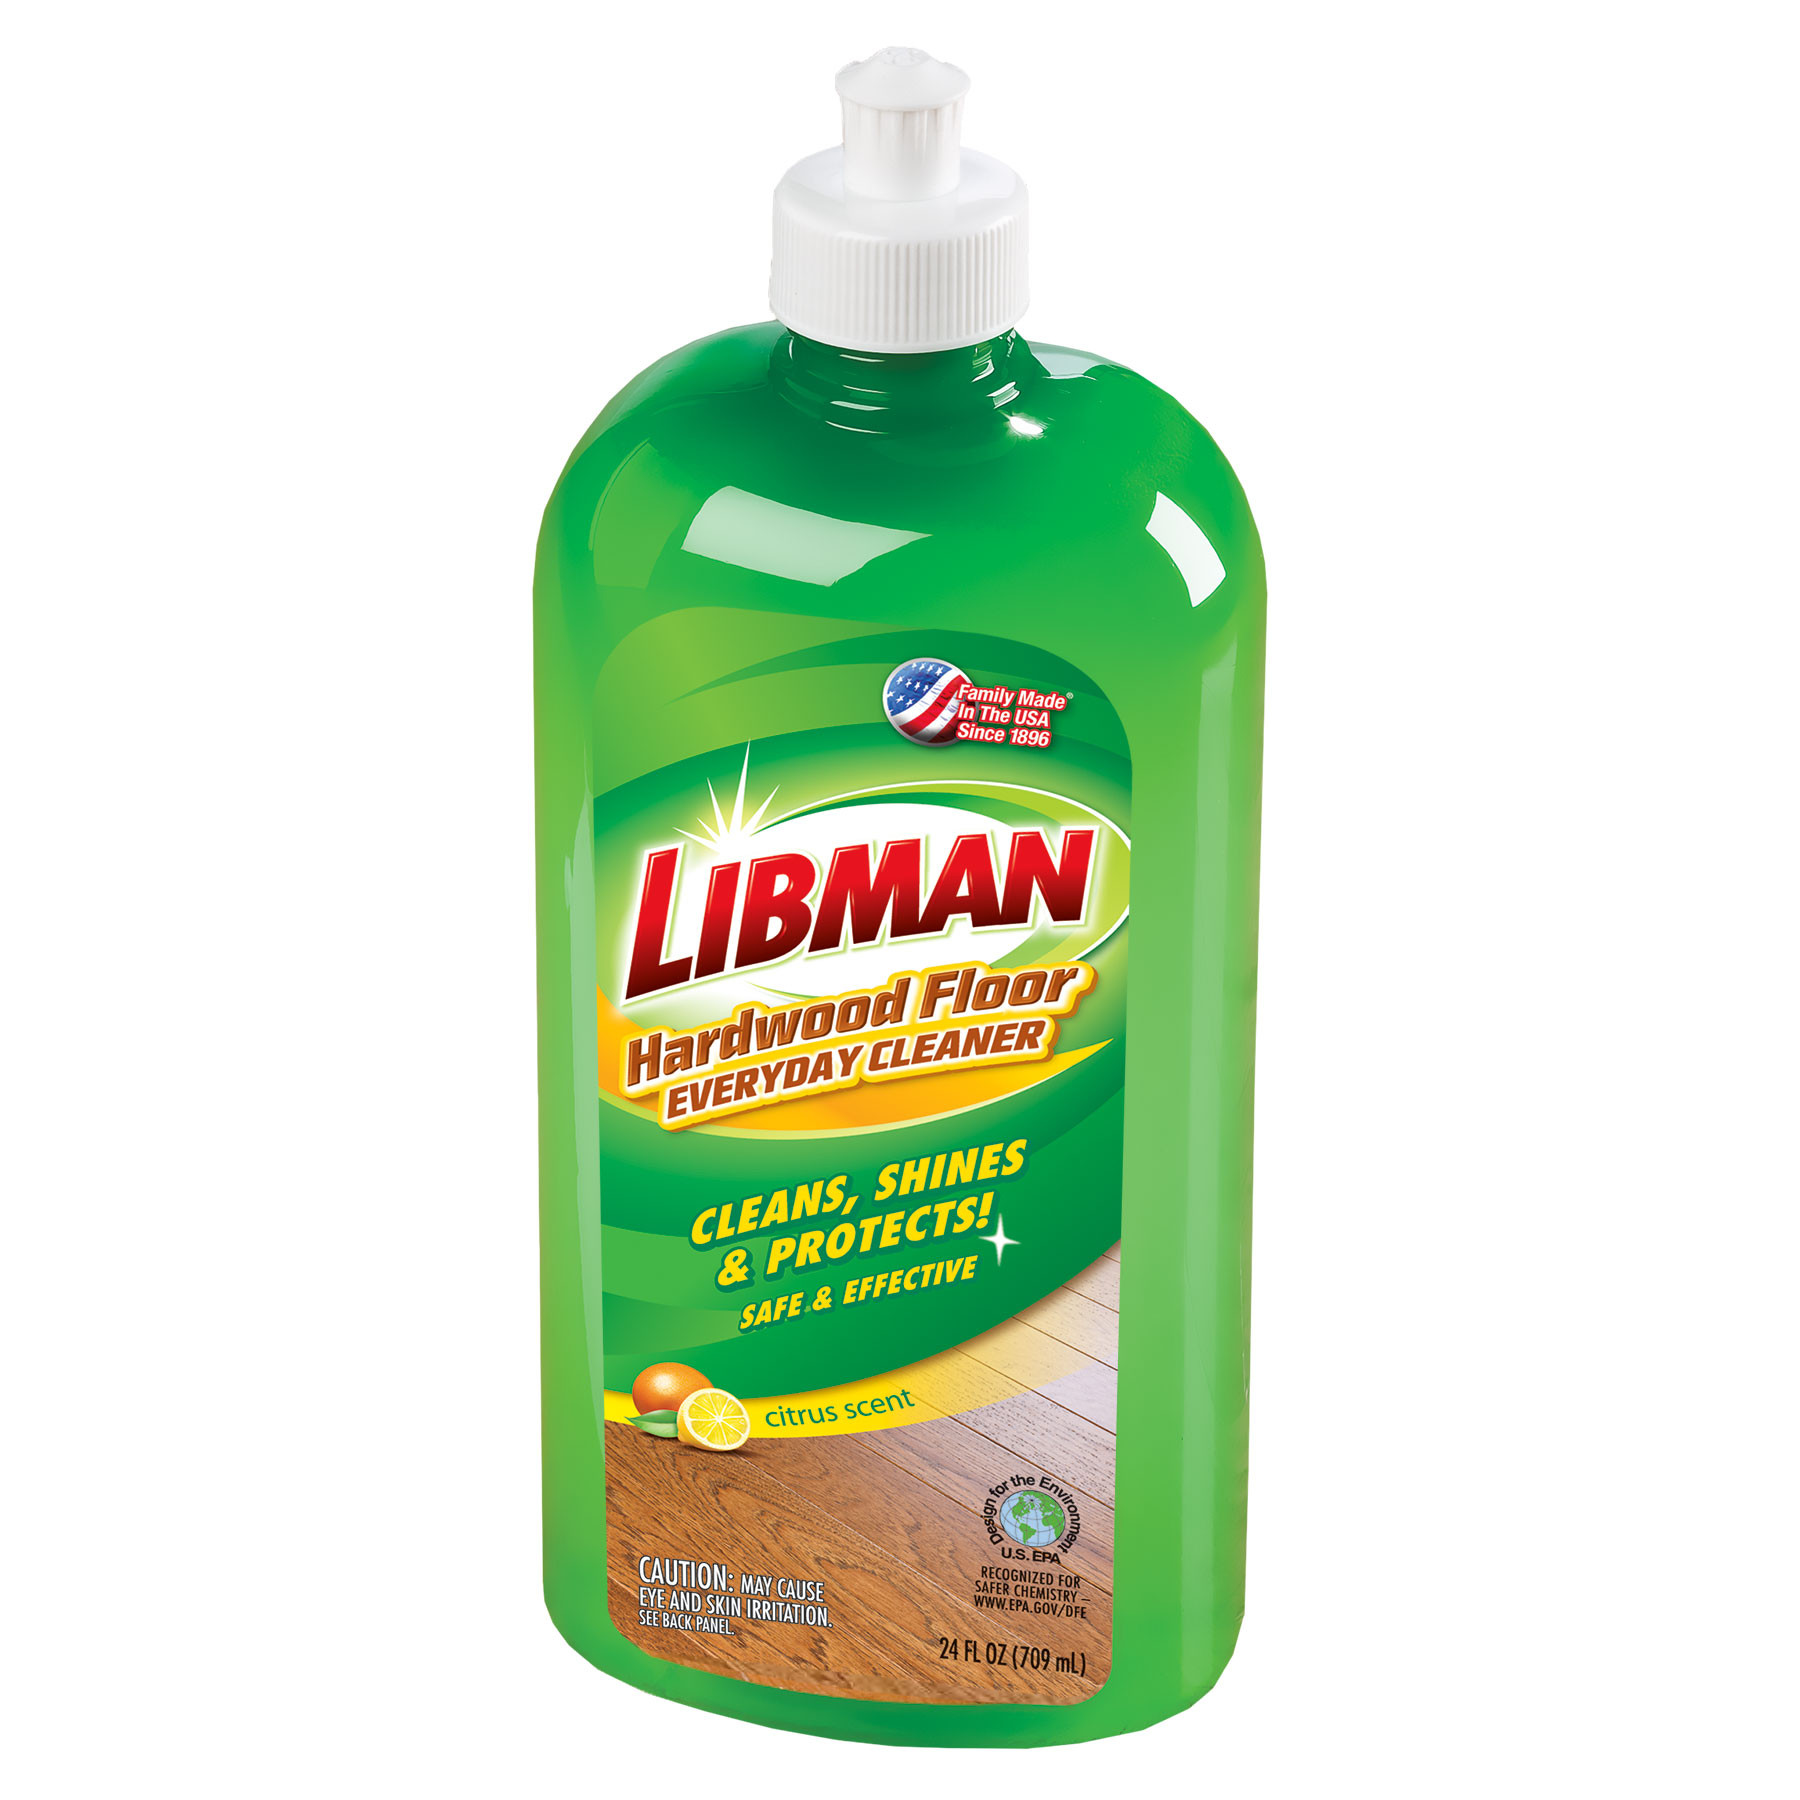 11 Fabulous Bruce Hardwood and Laminate Floor Cleaner Reviews 2024 free download bruce hardwood and laminate floor cleaner reviews of libman hardwood floor cleaning liquid food grocery peel and stick for libman hardwood floor cleaning liquid food grocery hardwood floor c